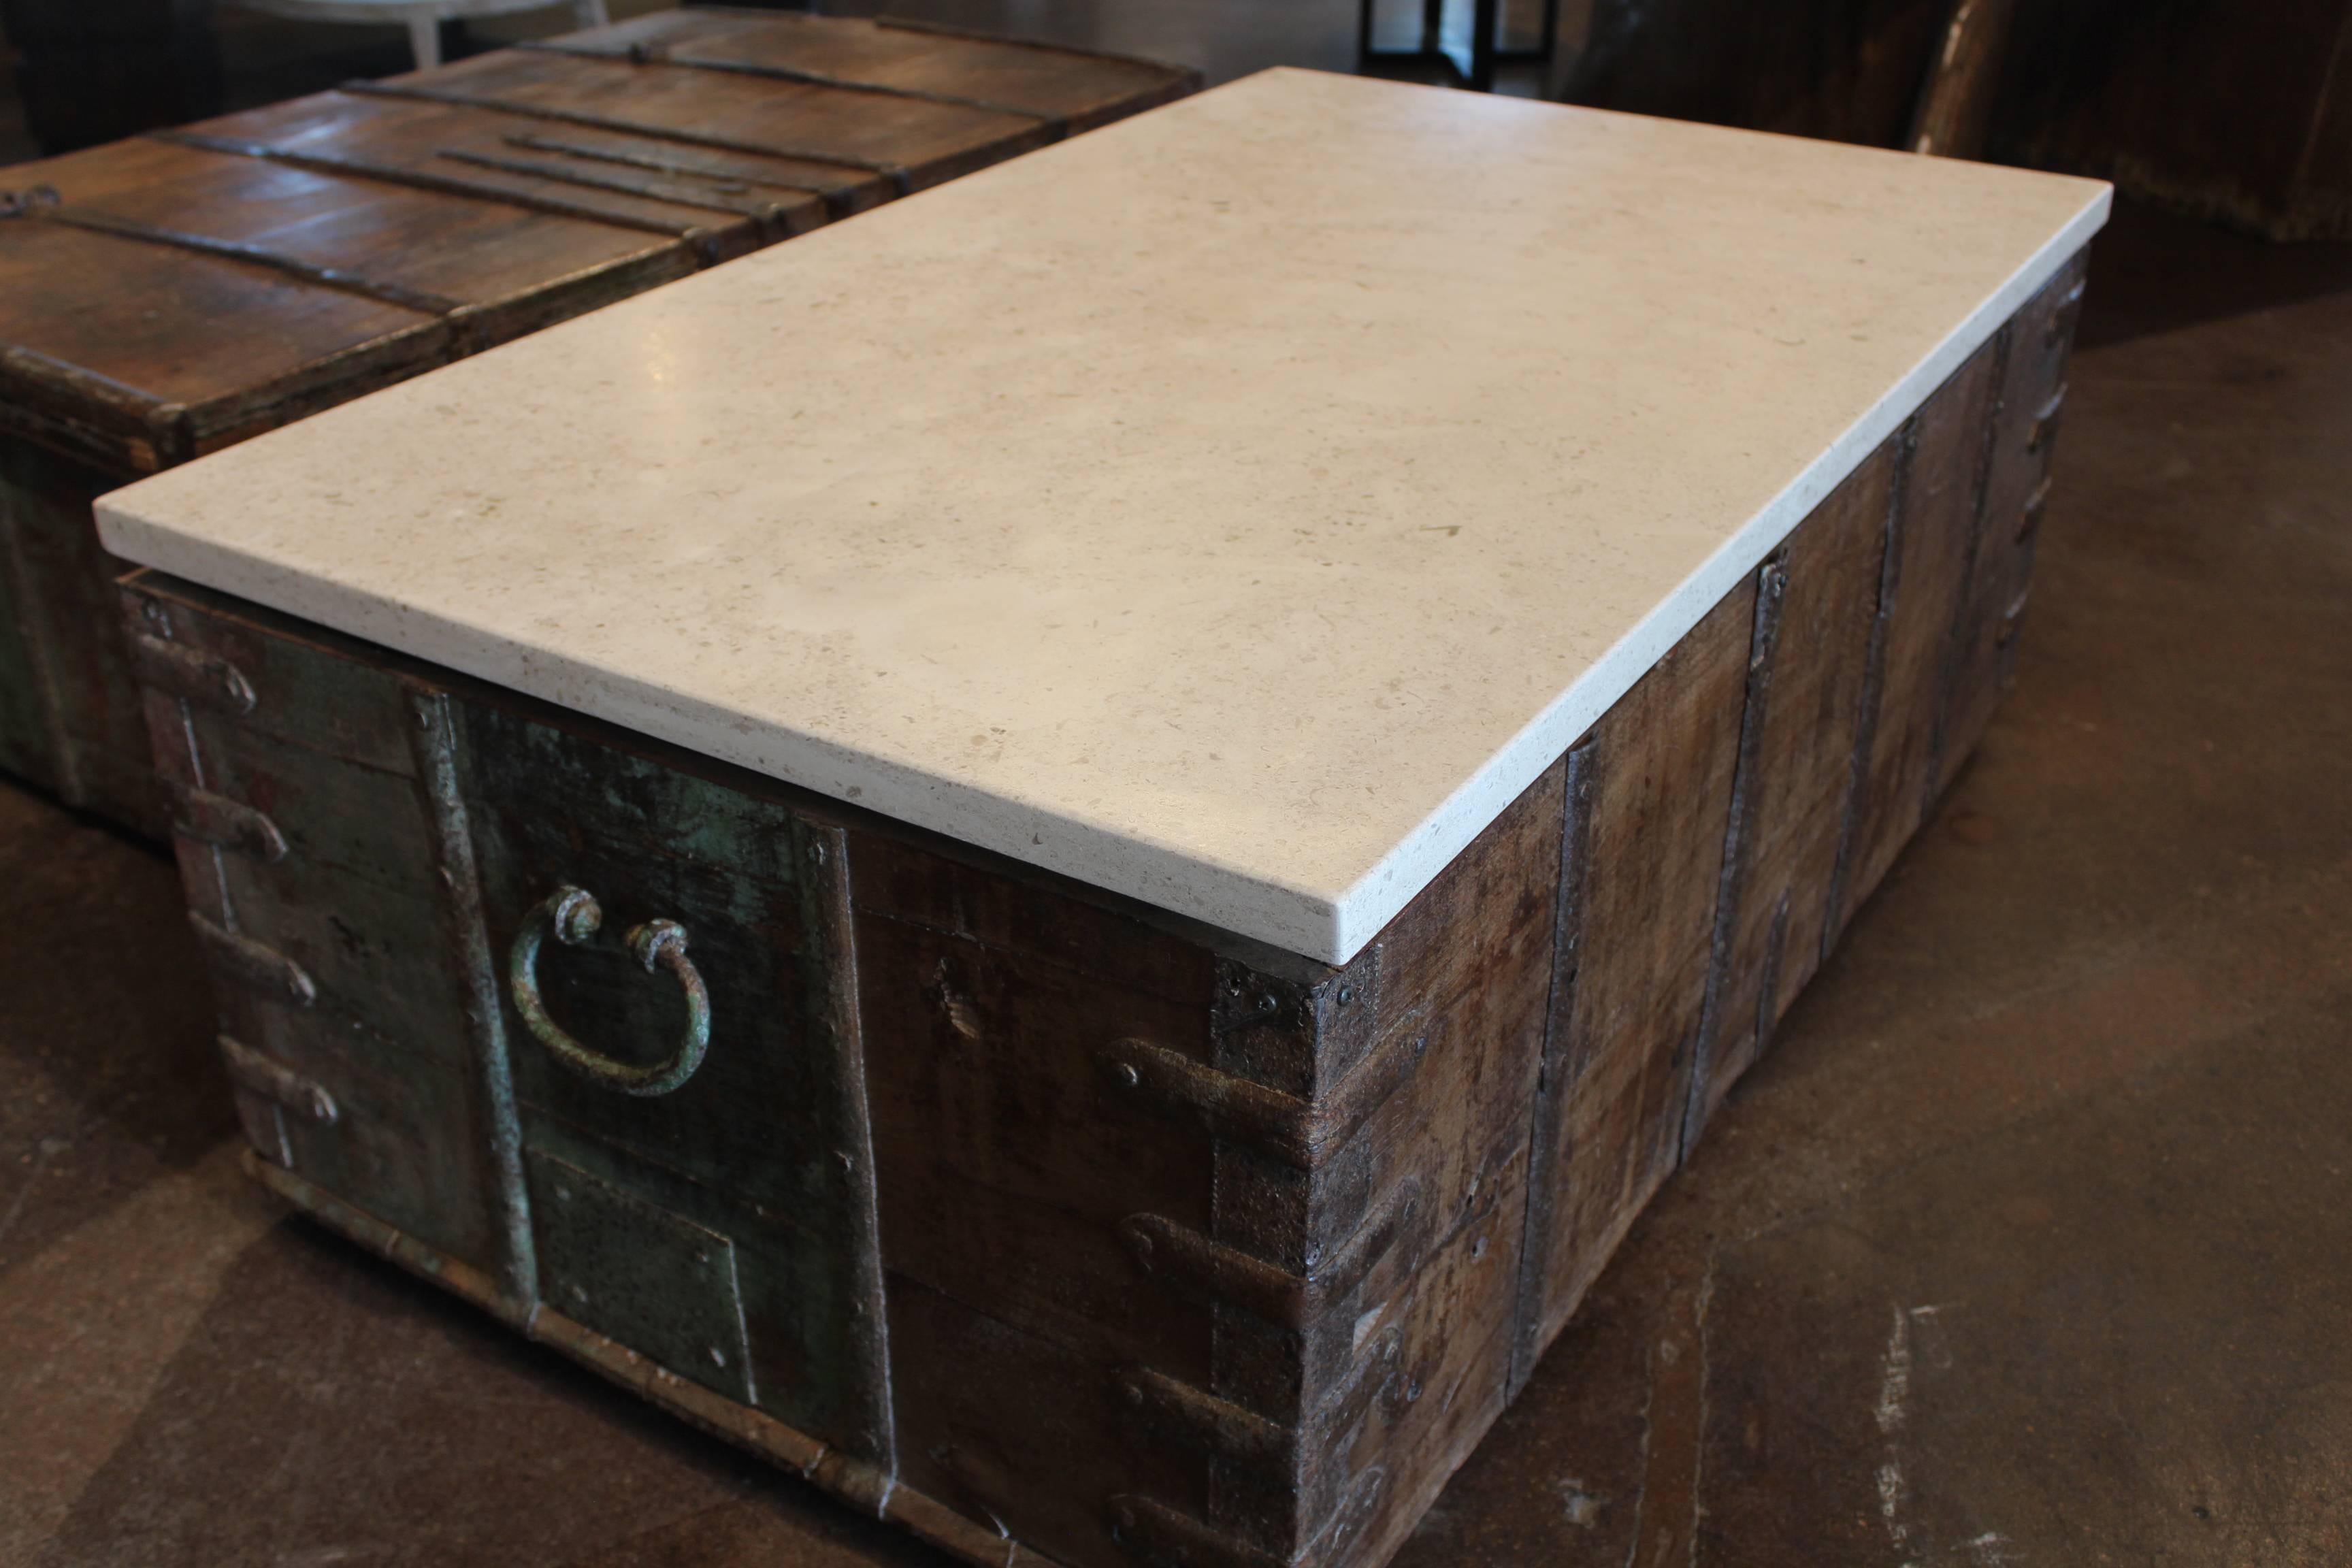 Southeast Asian Antique Trunk as Coffee Table with Unusual Strap Hardware and Limestone Top